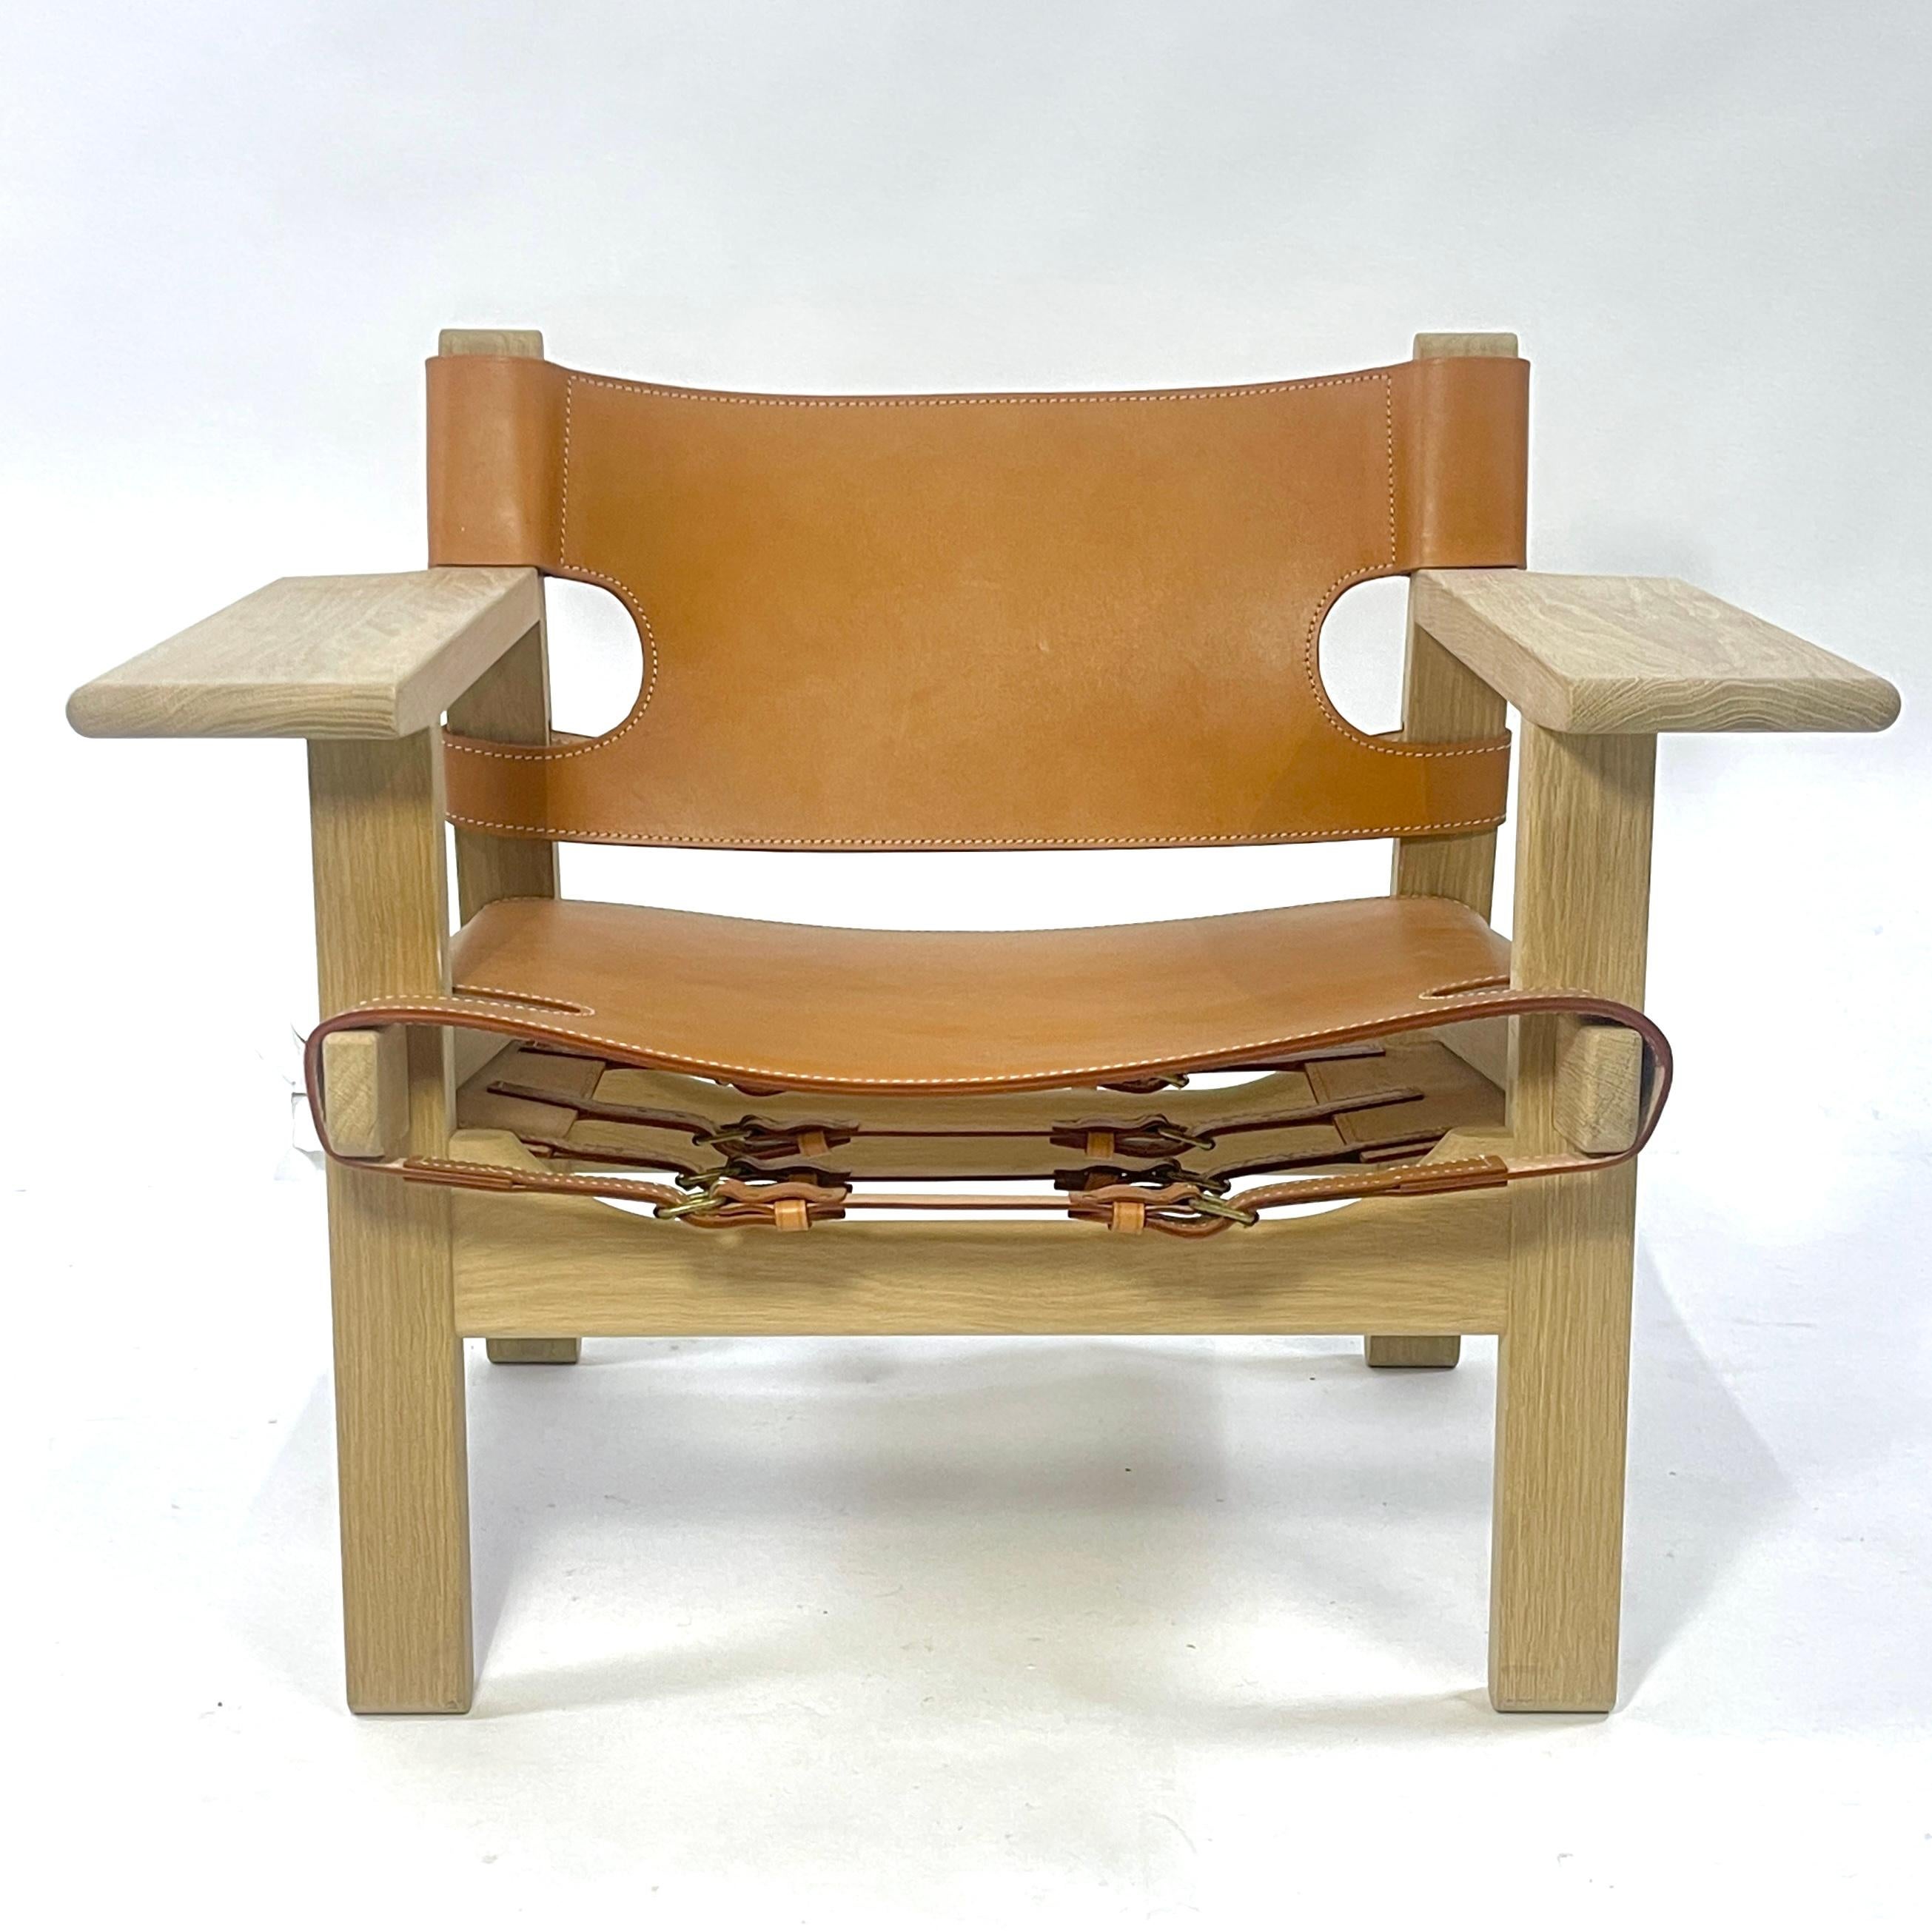 These chairs are barely used. Very good condition. There are 2 chairs available. Design Borge Mogensen, 1958
Quarter-sawn solid oak or walnut, metal buckles, saddle leather
Made in Denmark by Fredericia

